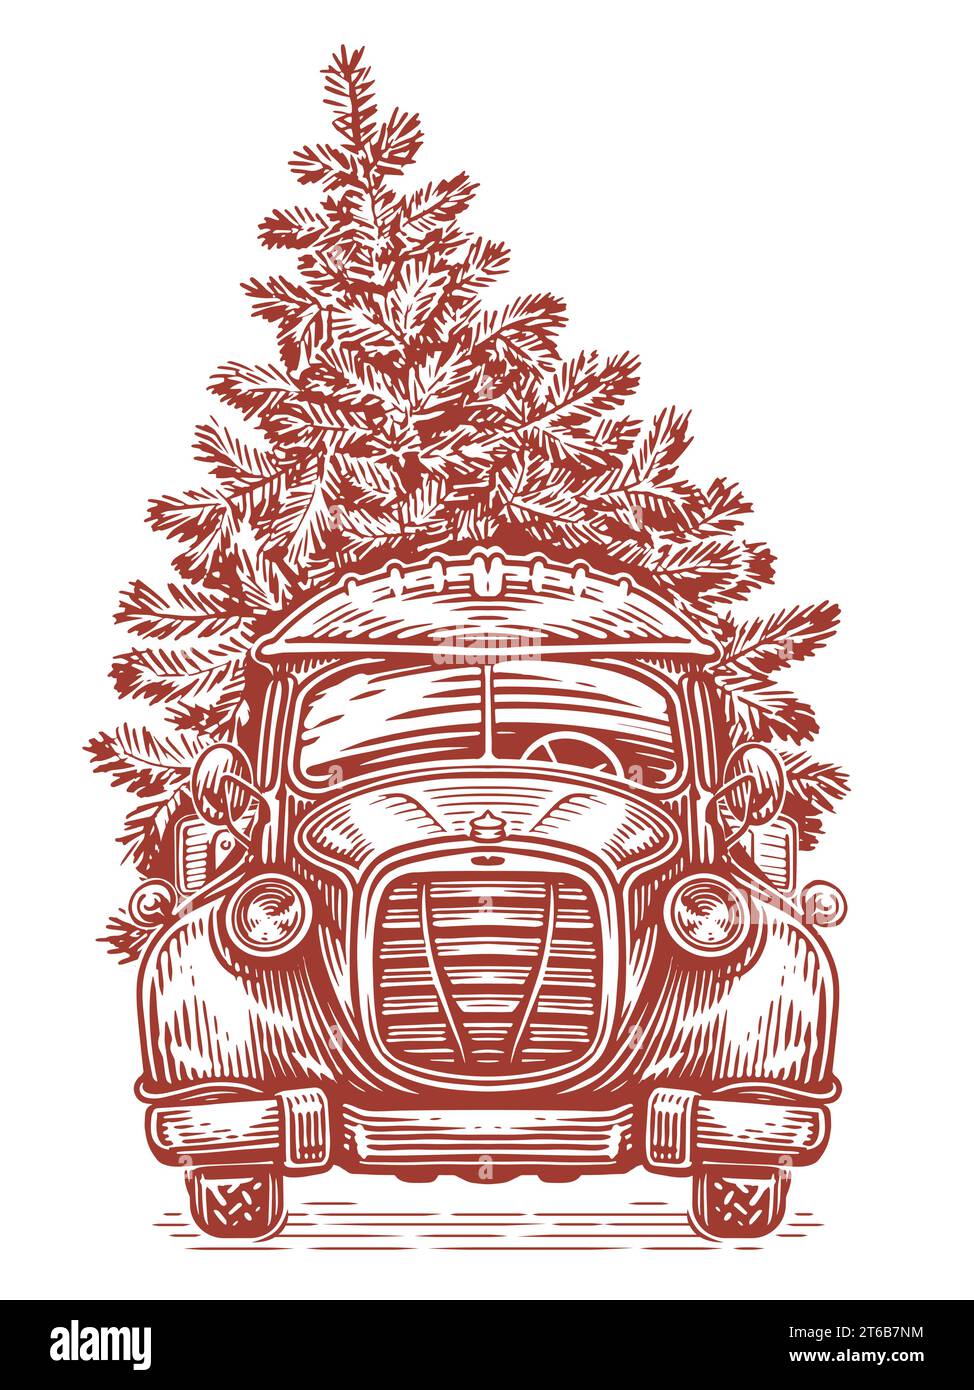 Vintage pickup truck and Christmas tree. Hand drawn sketch vector illustration engraving style Stock Vector